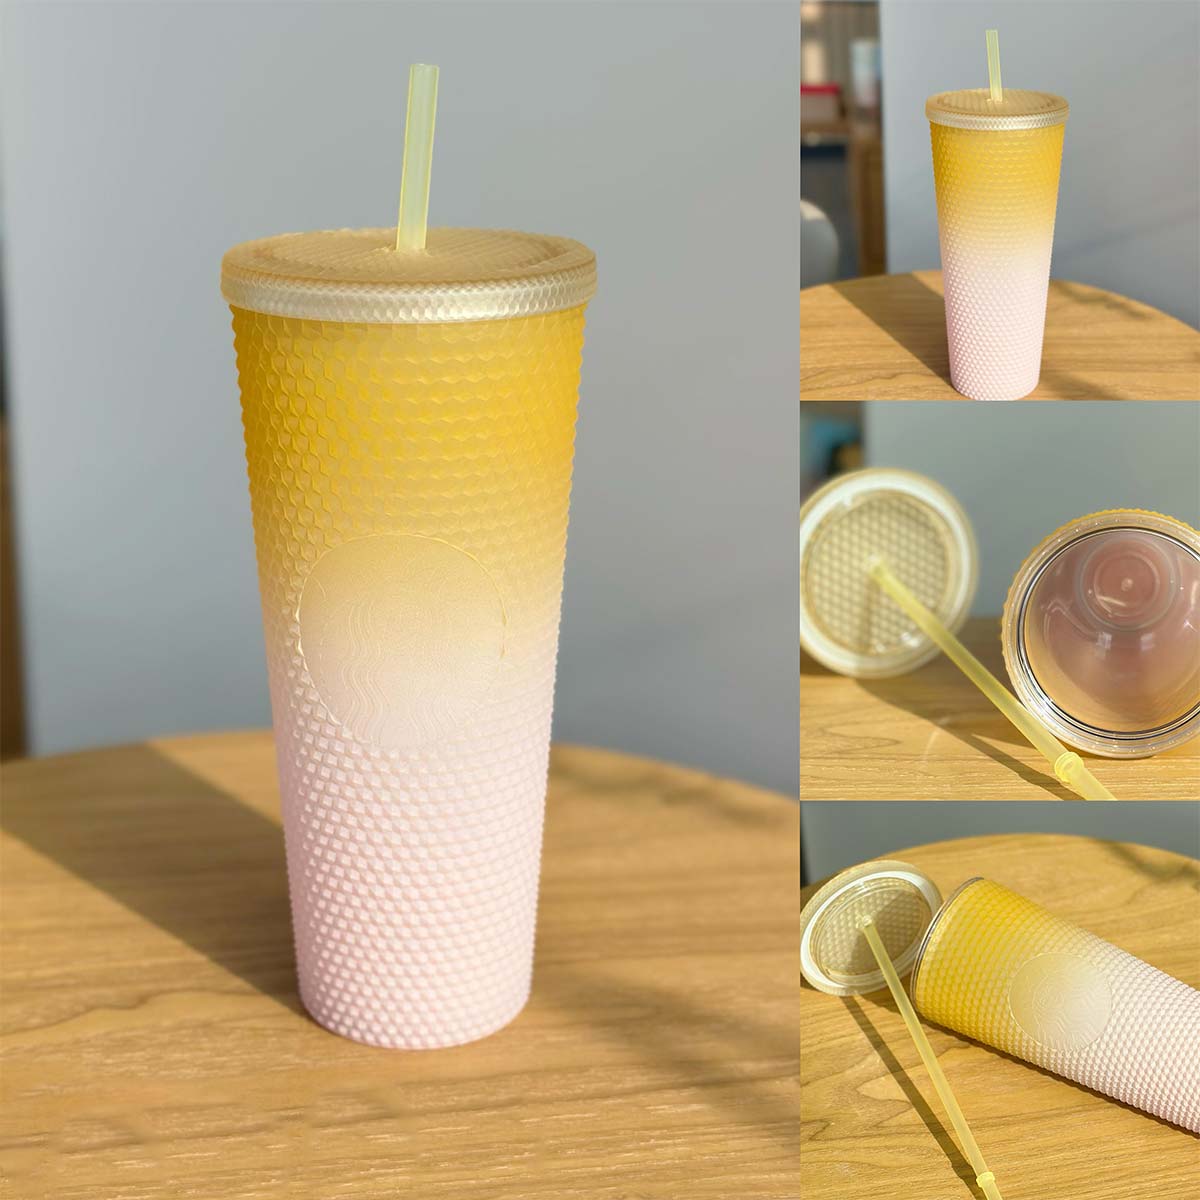 Starbucks Cold Cup, Venti Clear Cup, Starbucks cold drinking cup